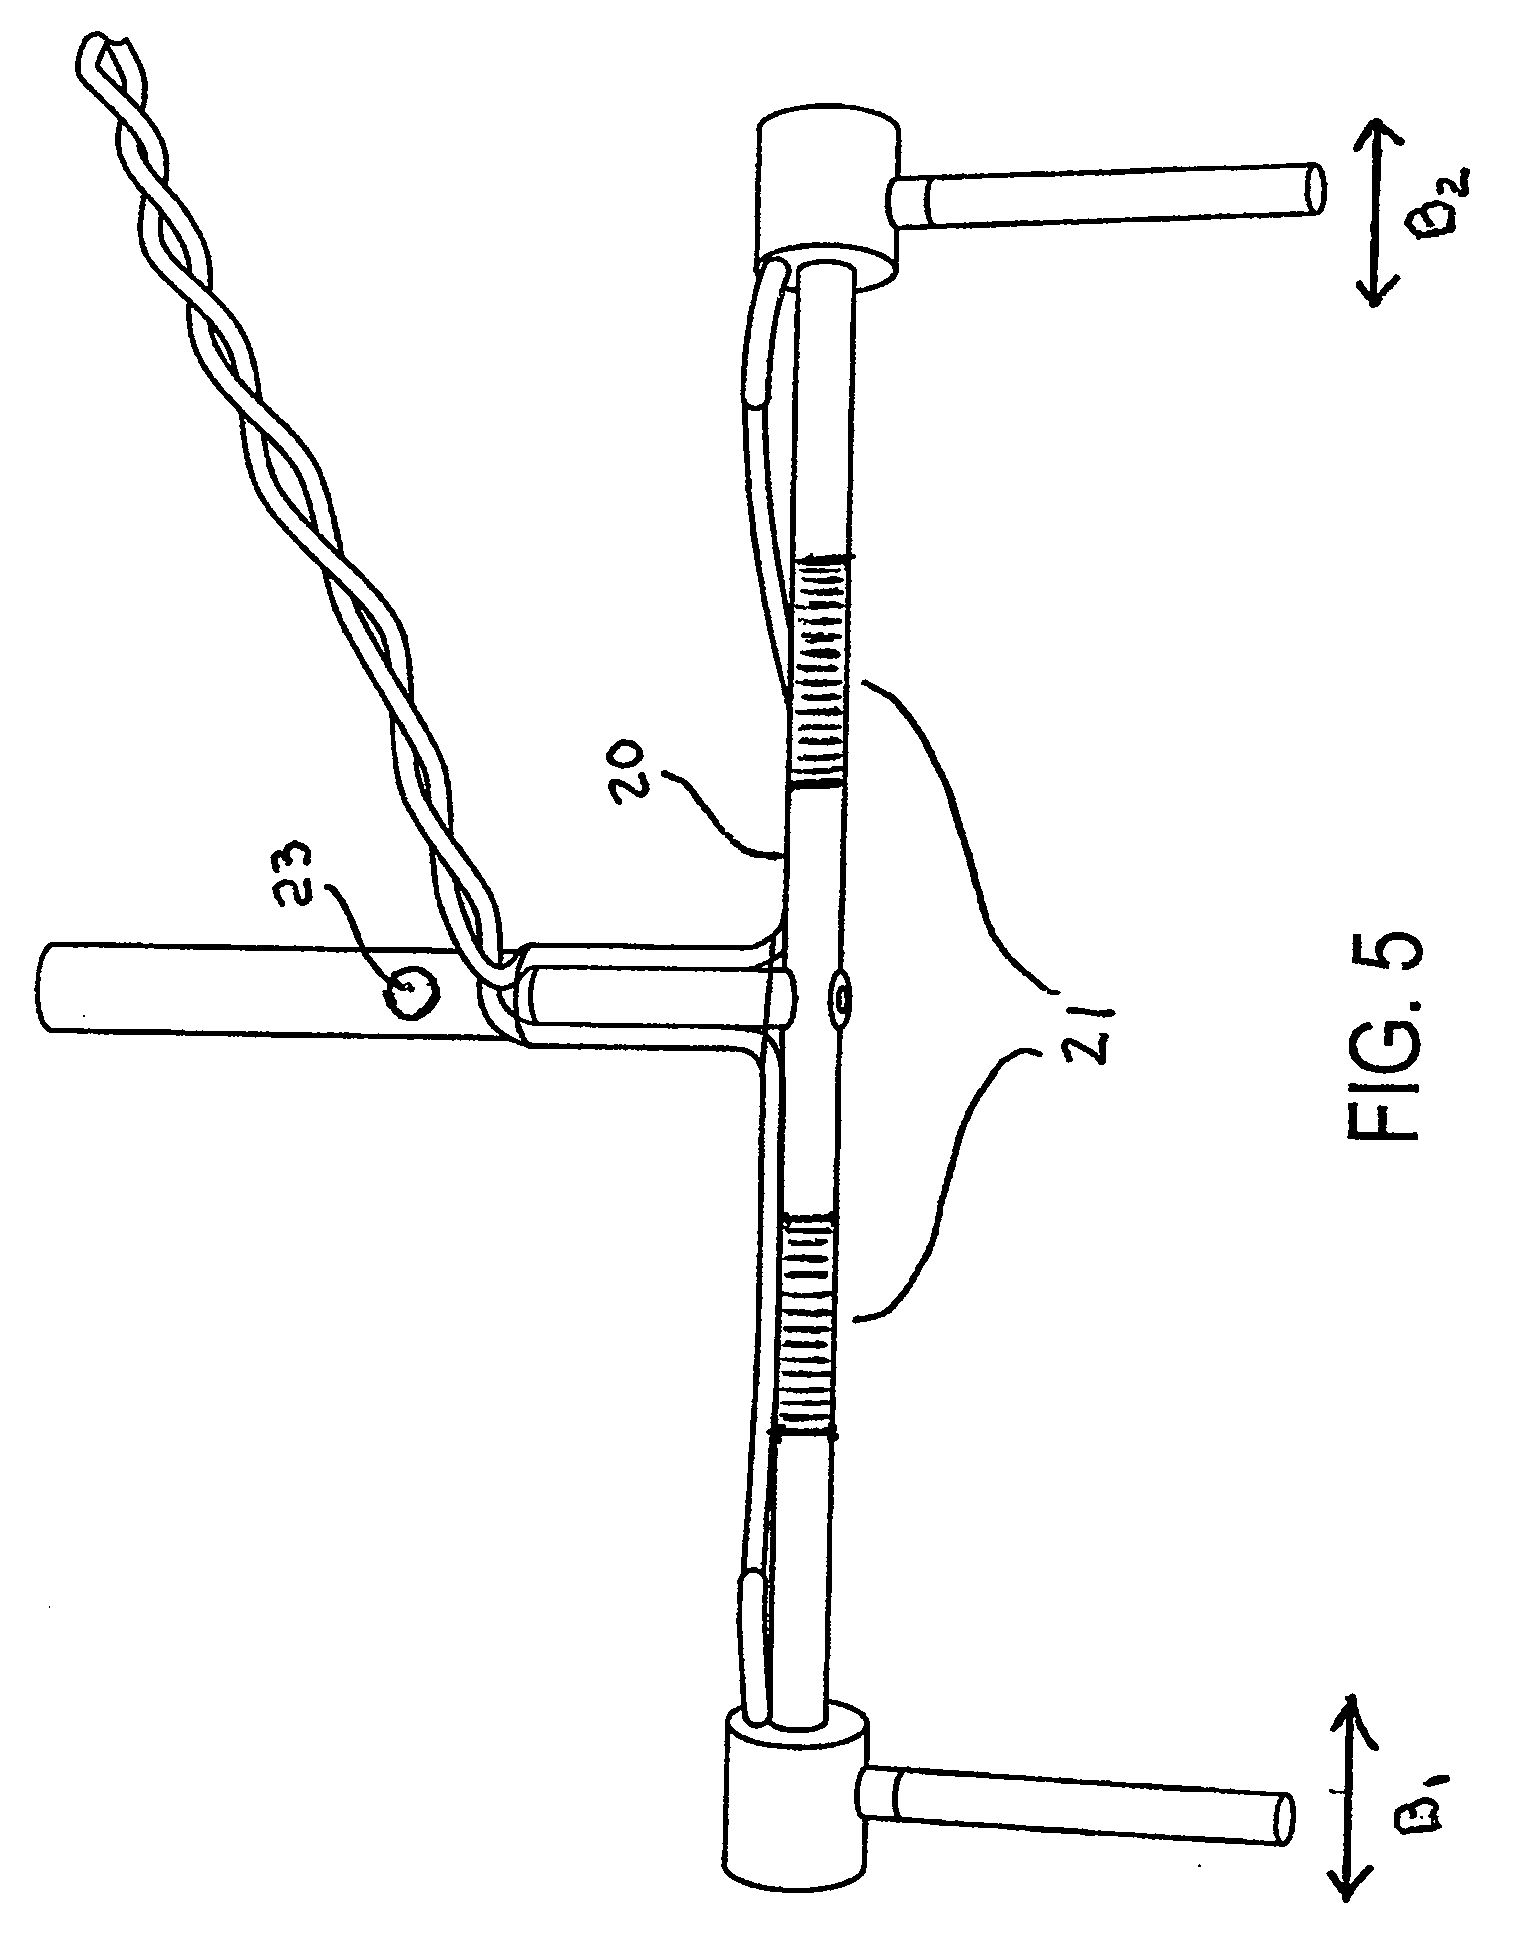 Bipolar Stimulation/Recording Device With Widely Spaced Electrodes